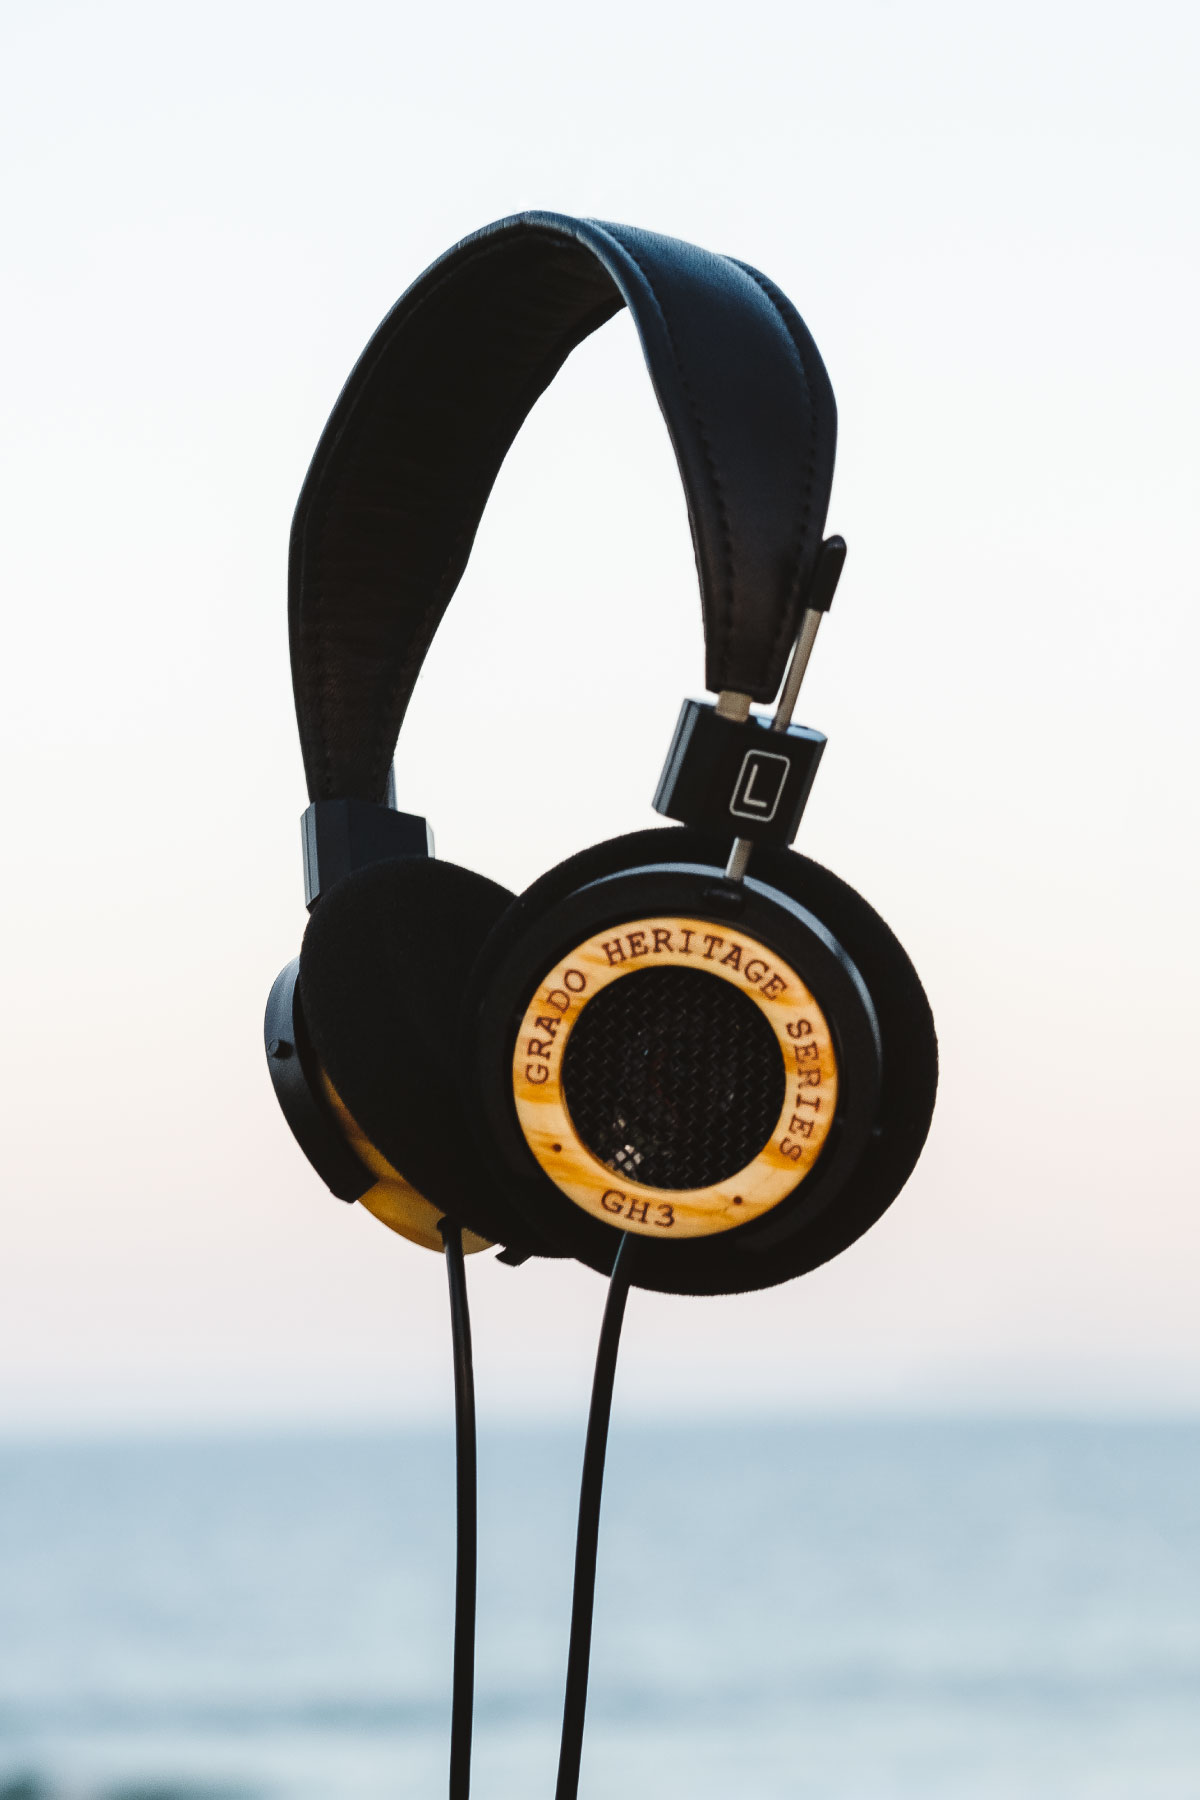 Photo of GH3 Headphones levitating in front of a view of the ocean and the sky.